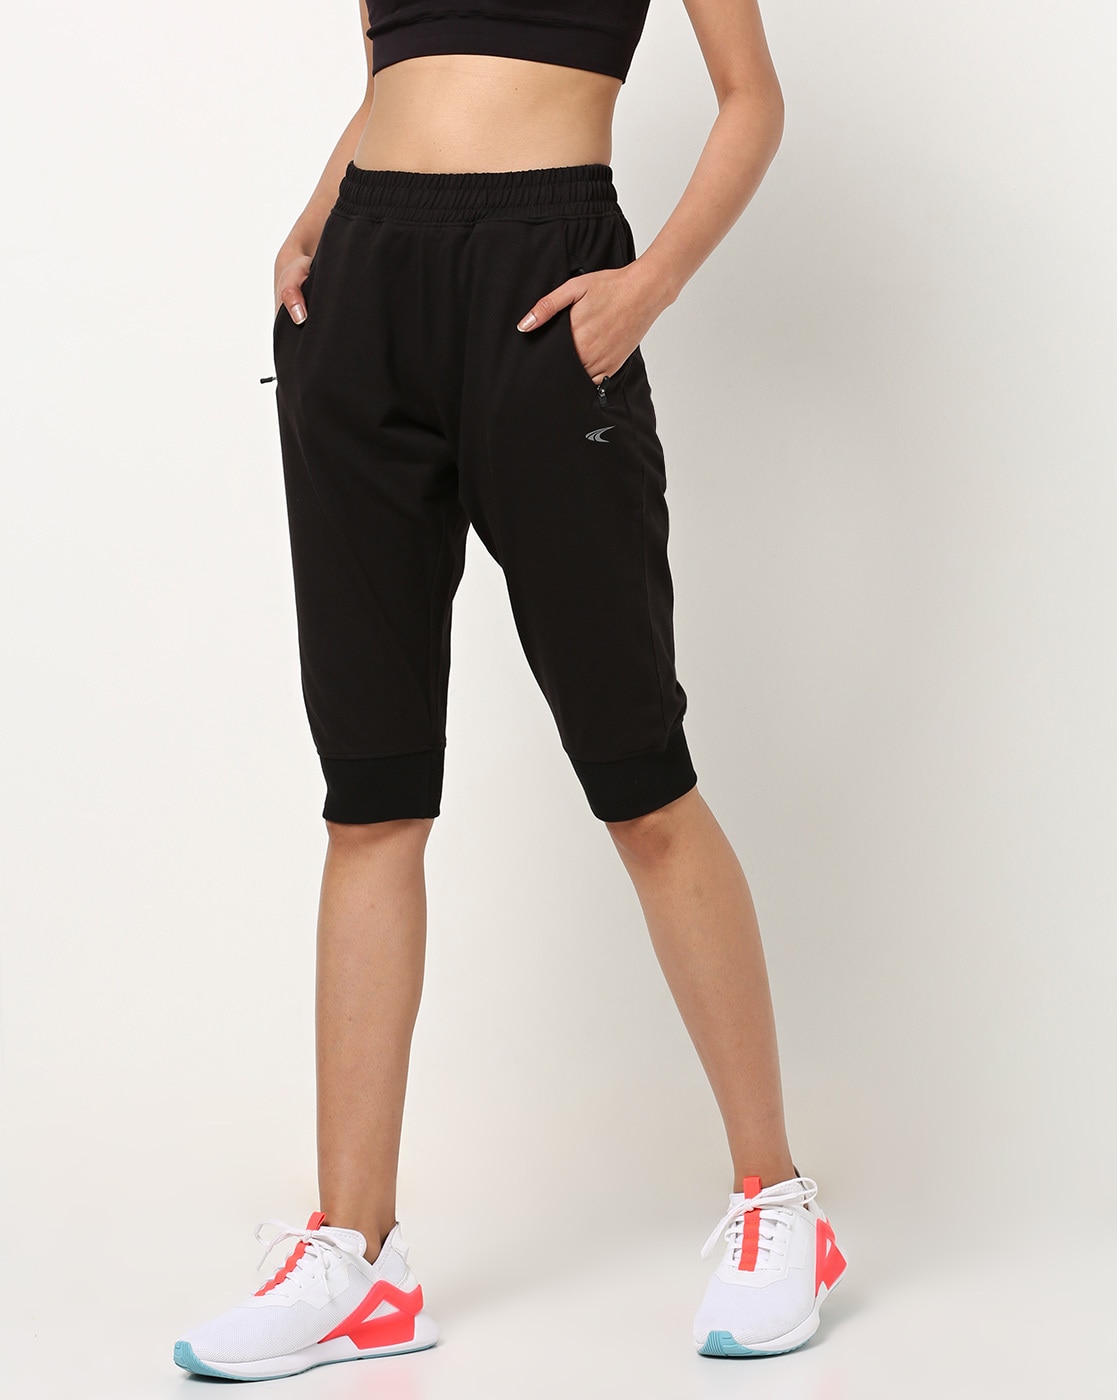 Buy Black Track Pants for Women by PERFORMAX Online